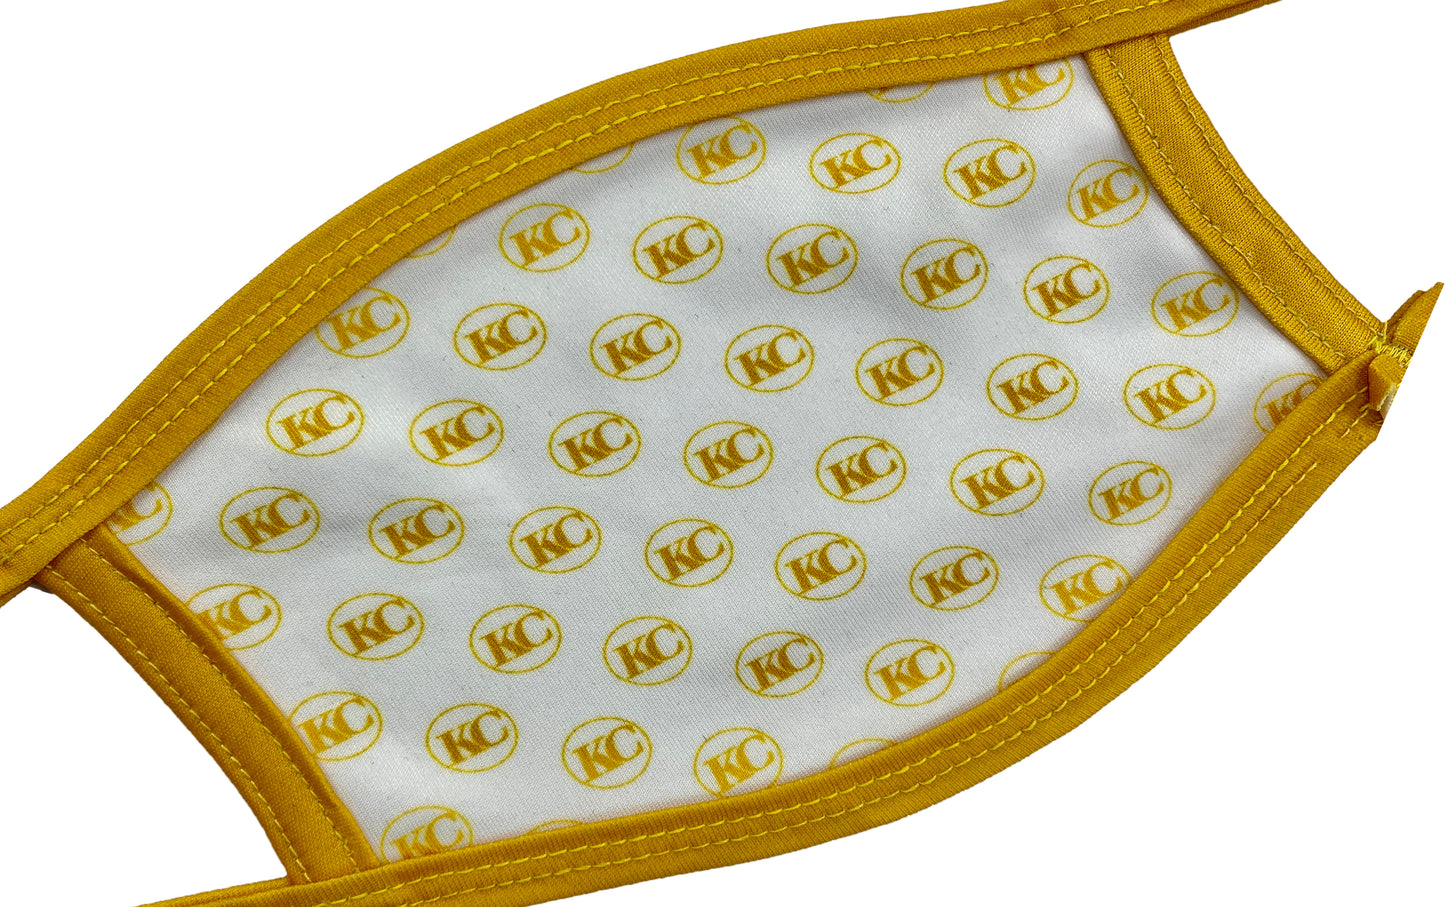 KC CLASSIC FABRIC MASK - GOLDIE